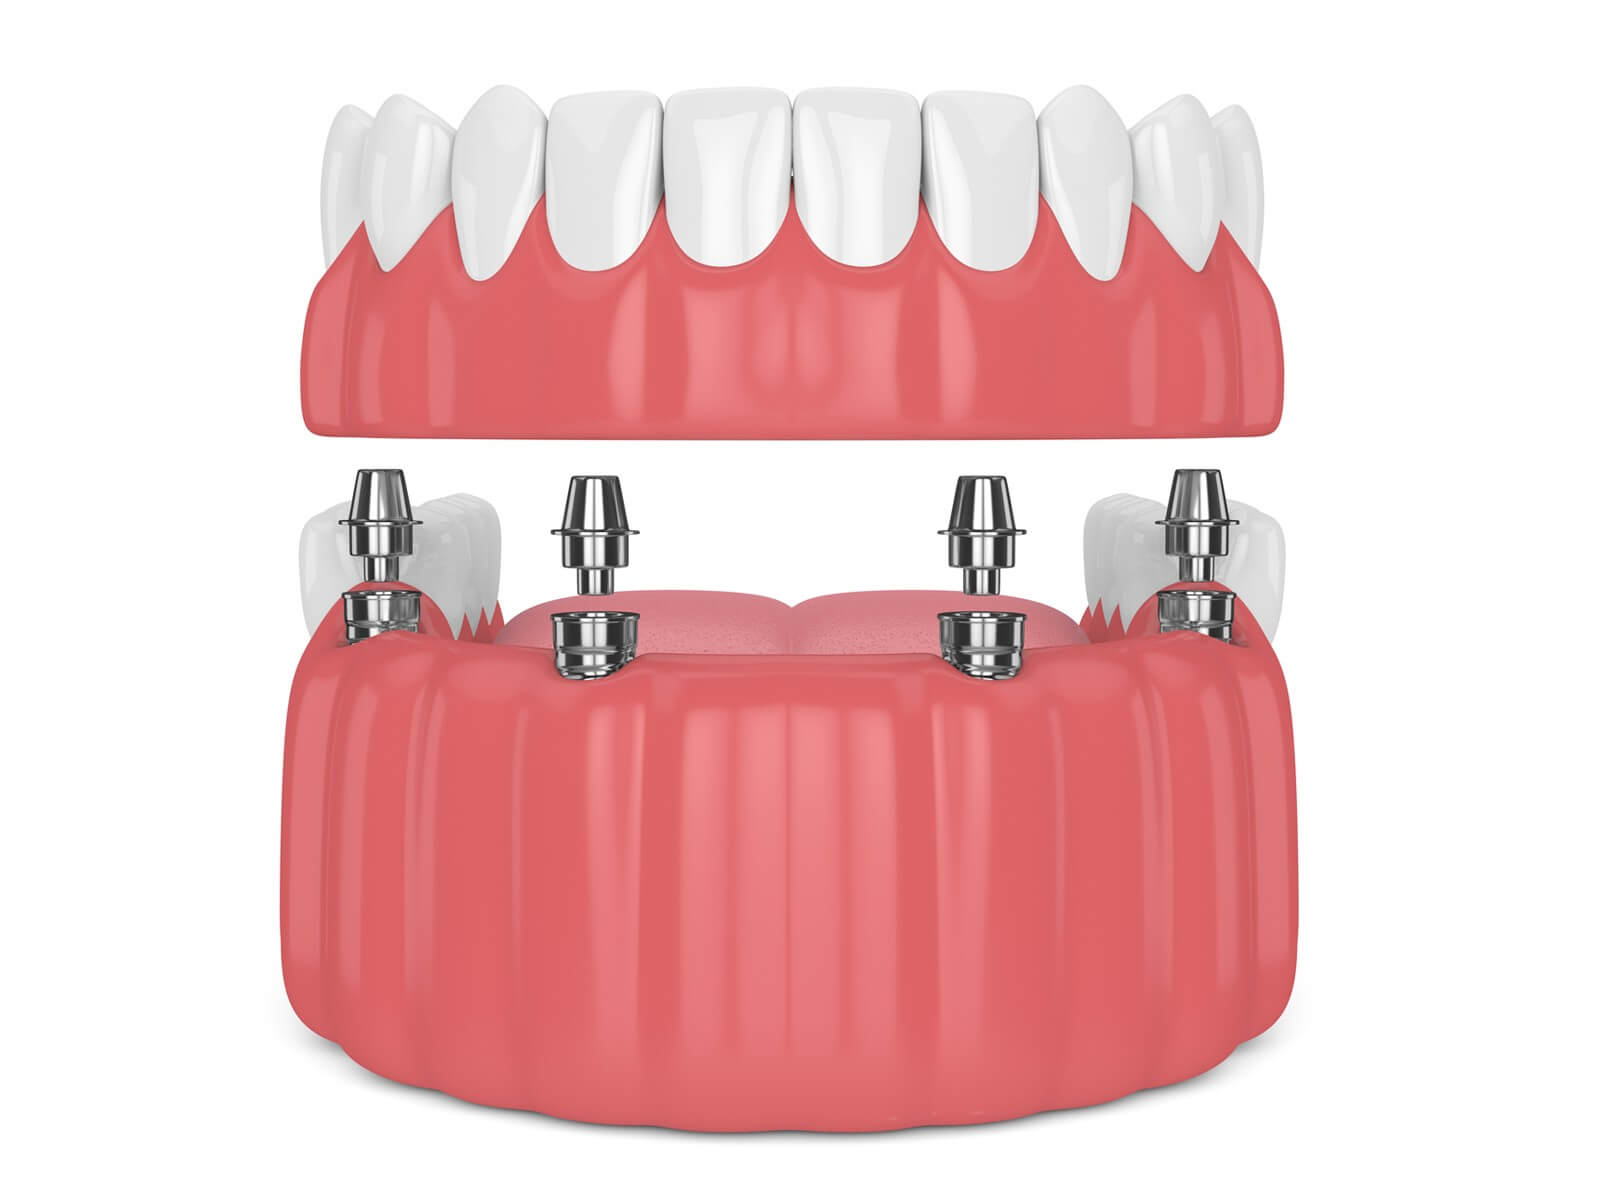 What is an Overdenture and what are its benefits?